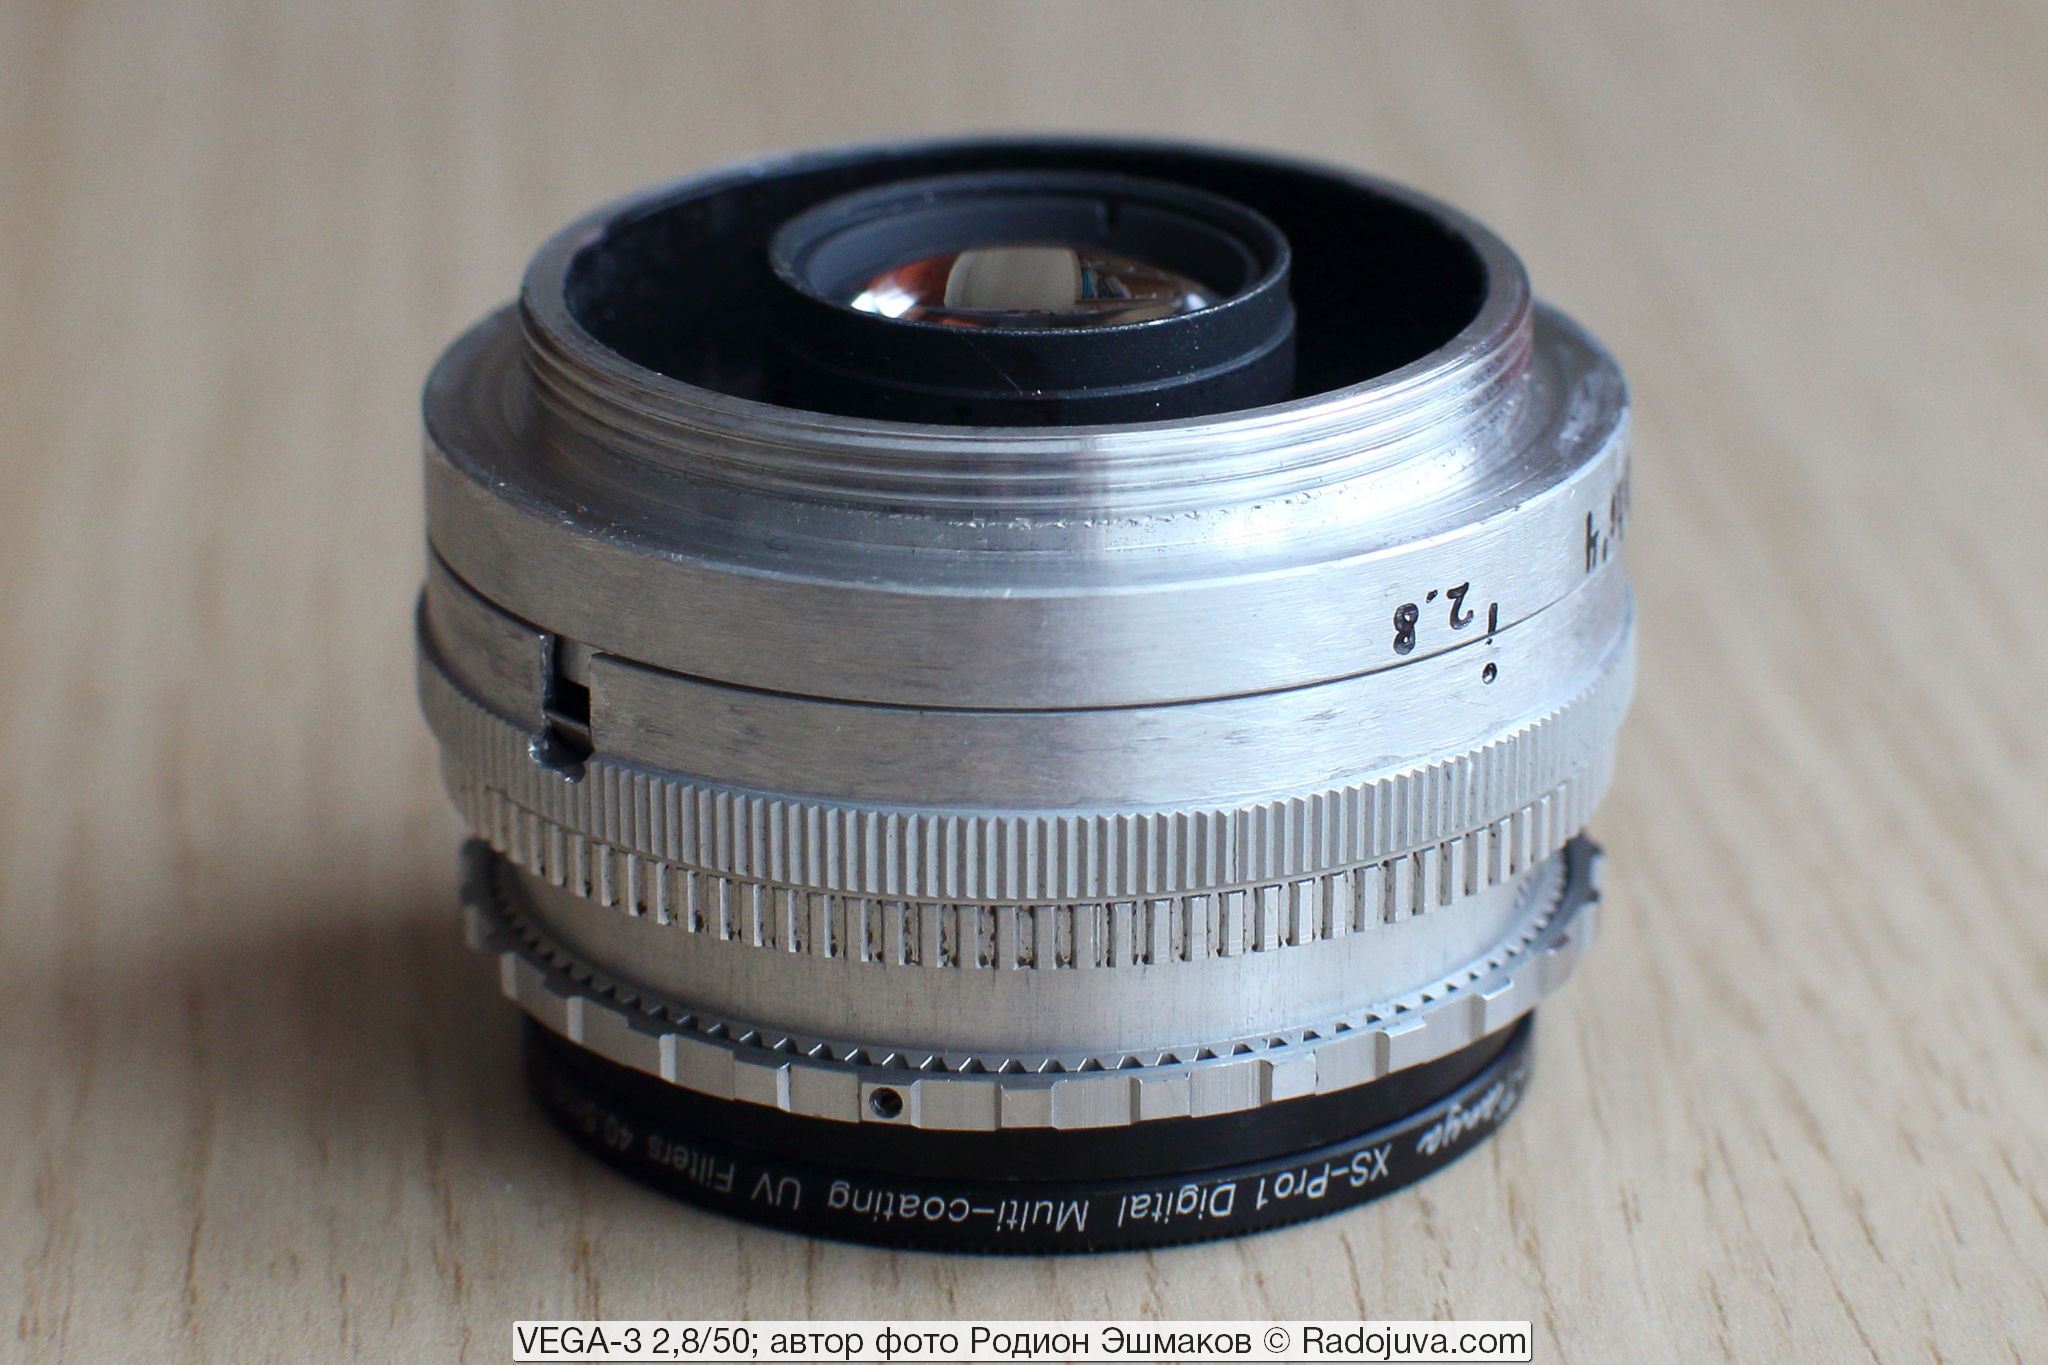 View of the rear lens group of the adapted Vega-3 lens.